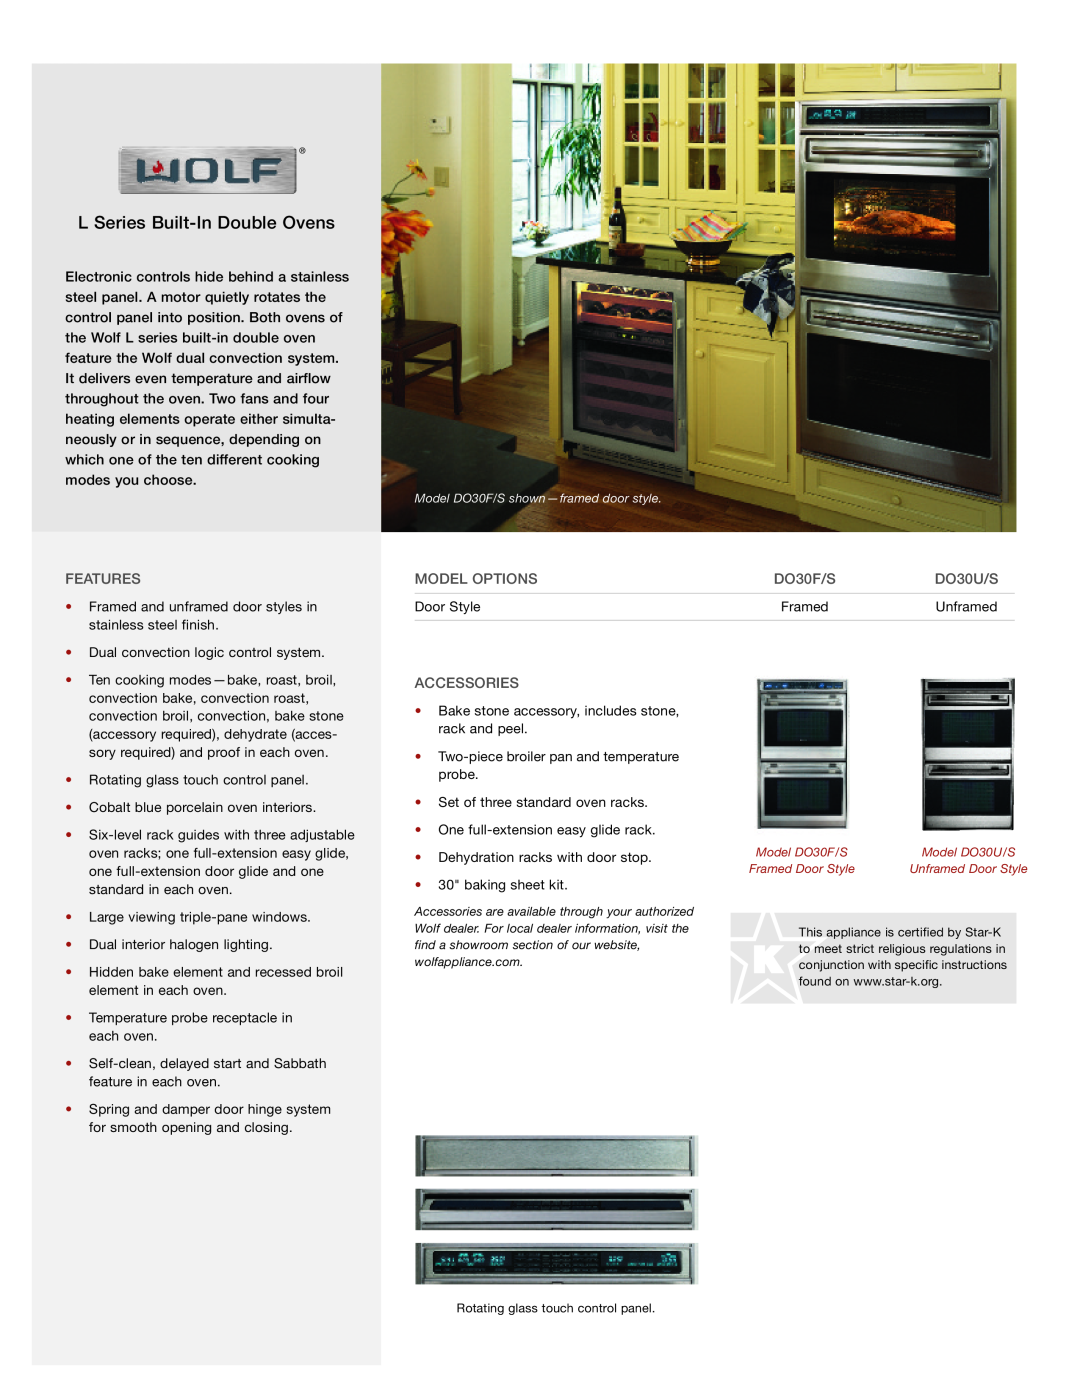 Wolf Appliance Company DO30F/S manual L Series Built-In Double Ovens, Features, Model Options, DO30U/S, Accessories 